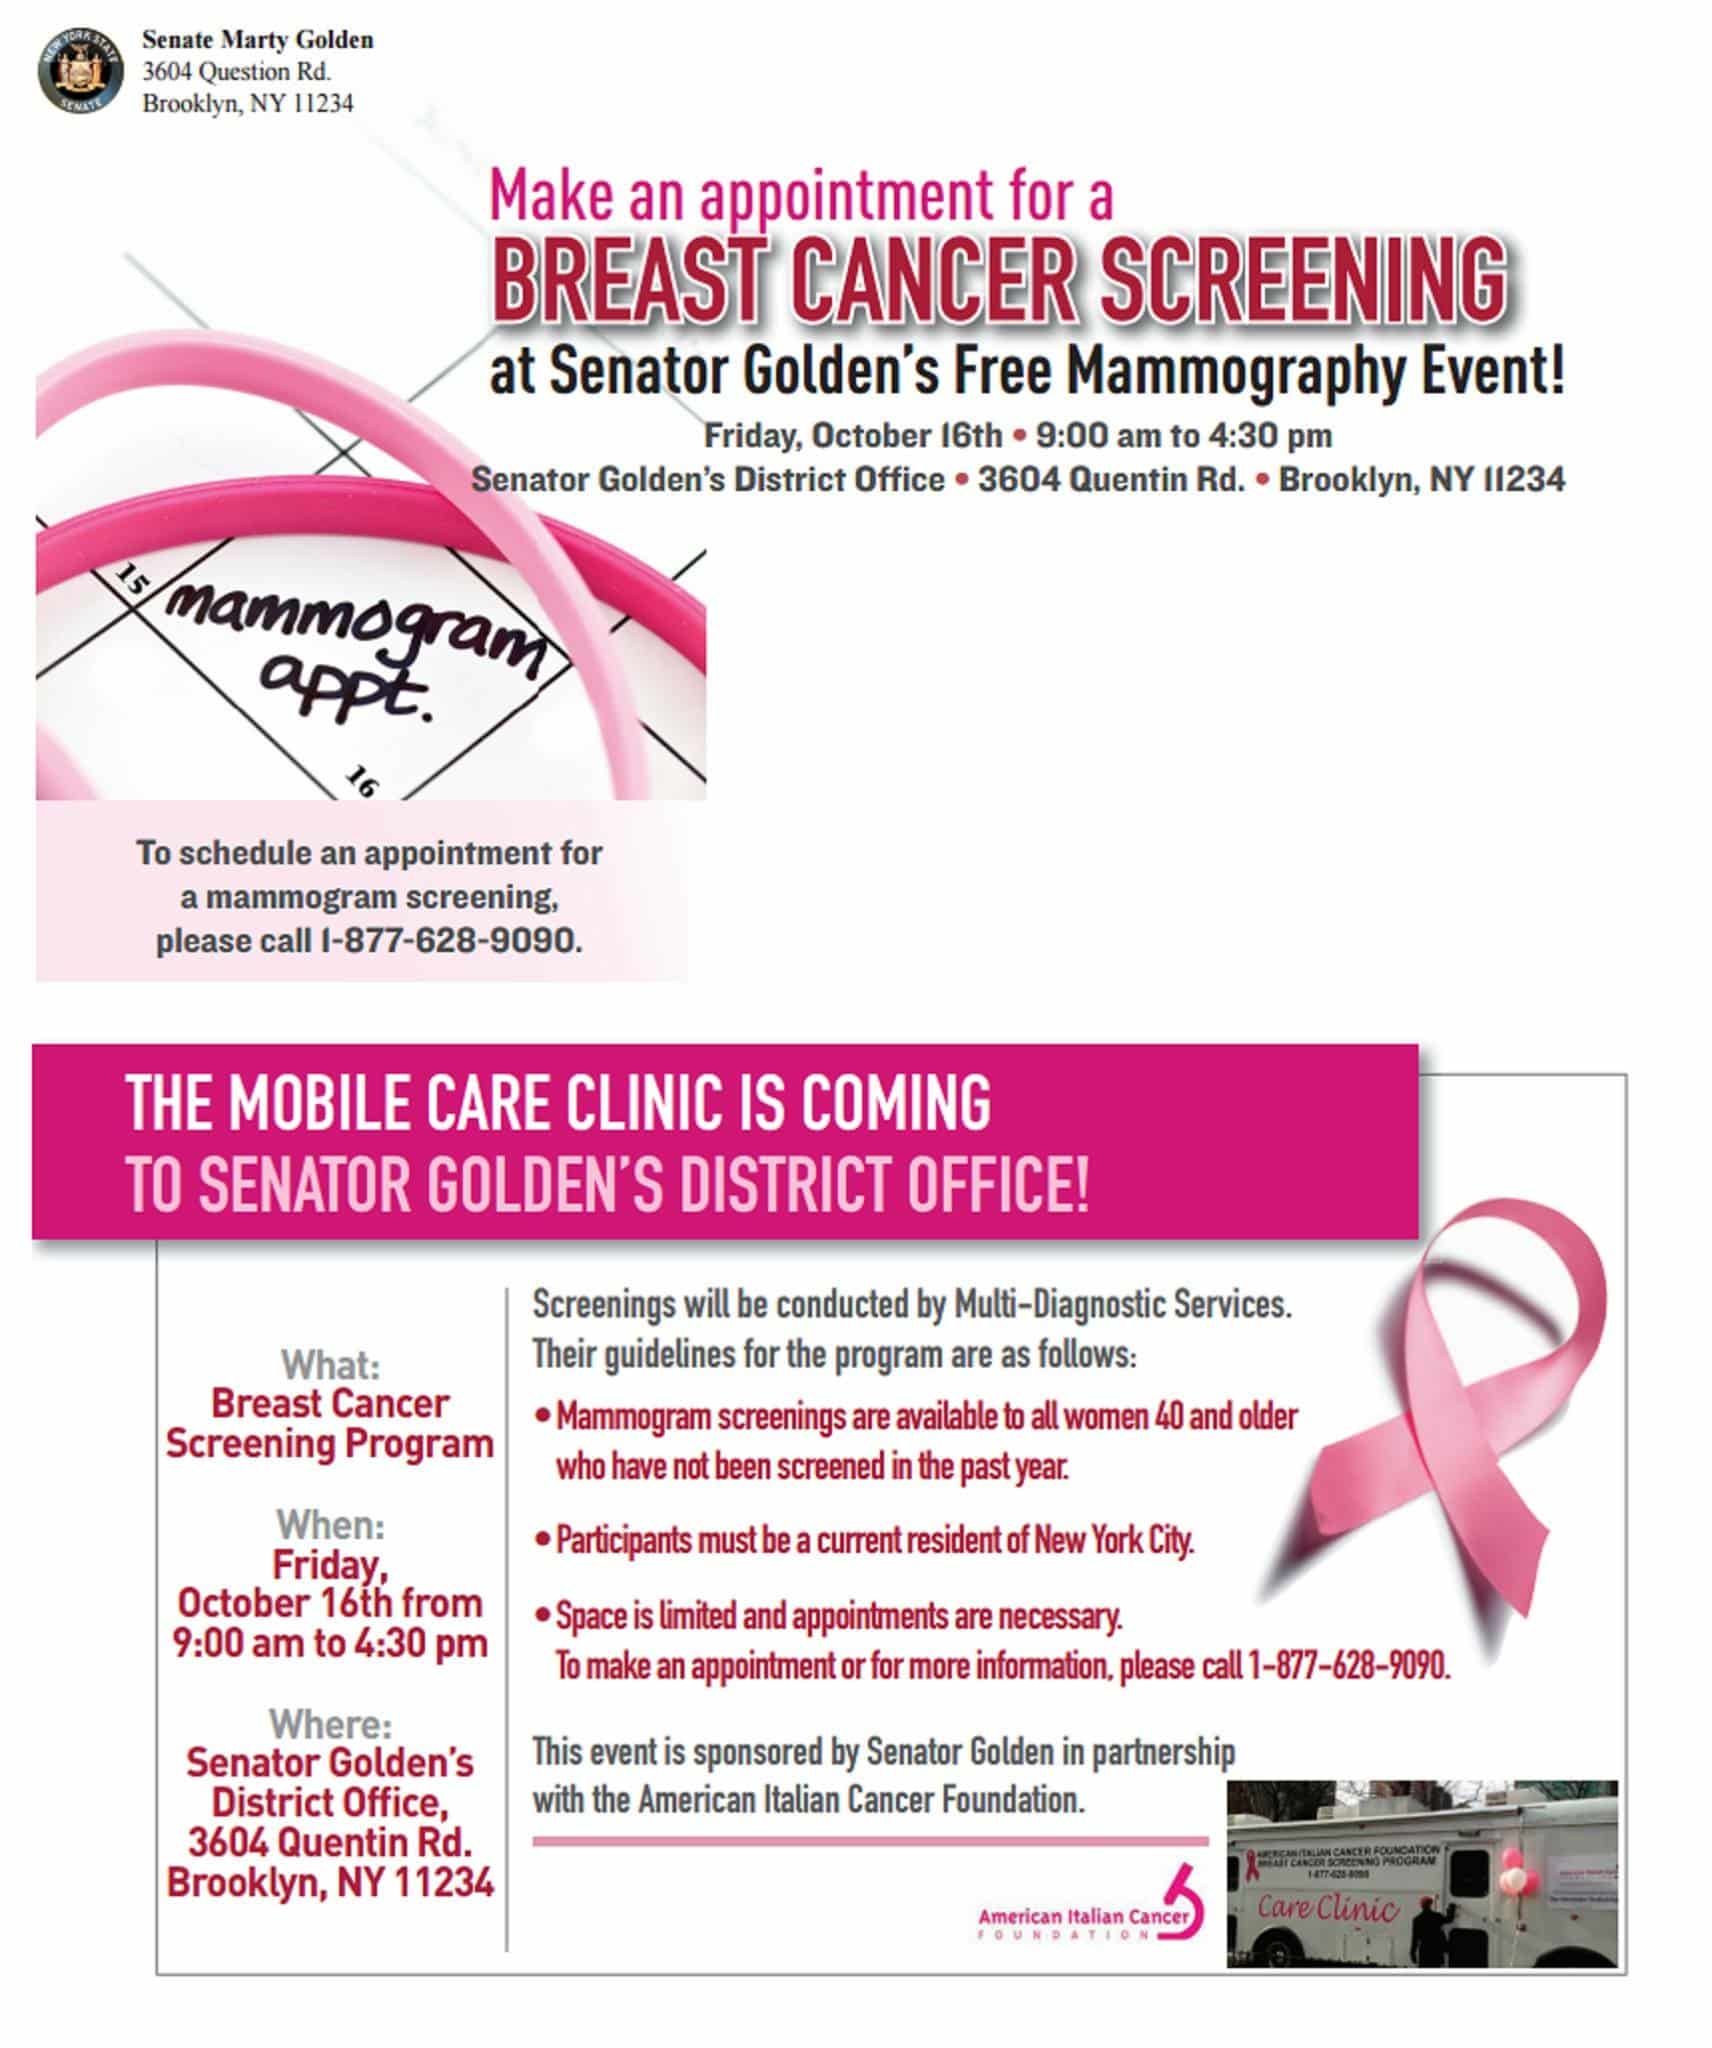 MAKE AN APPOINTMENT FOR A FREE BREAST CANCER SCREENING